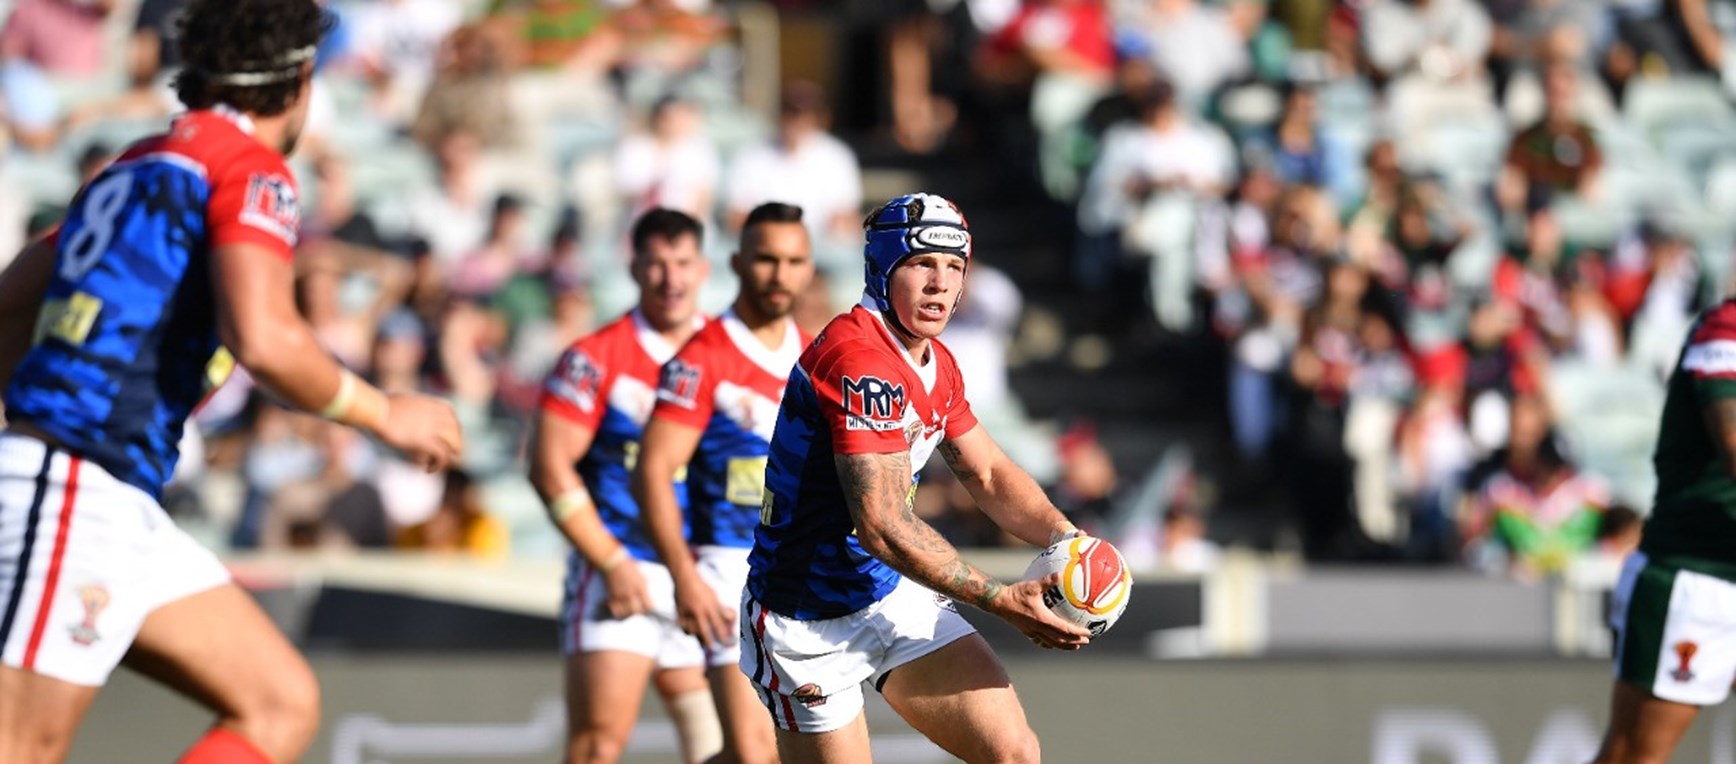 RLWC: Photos from the opening round